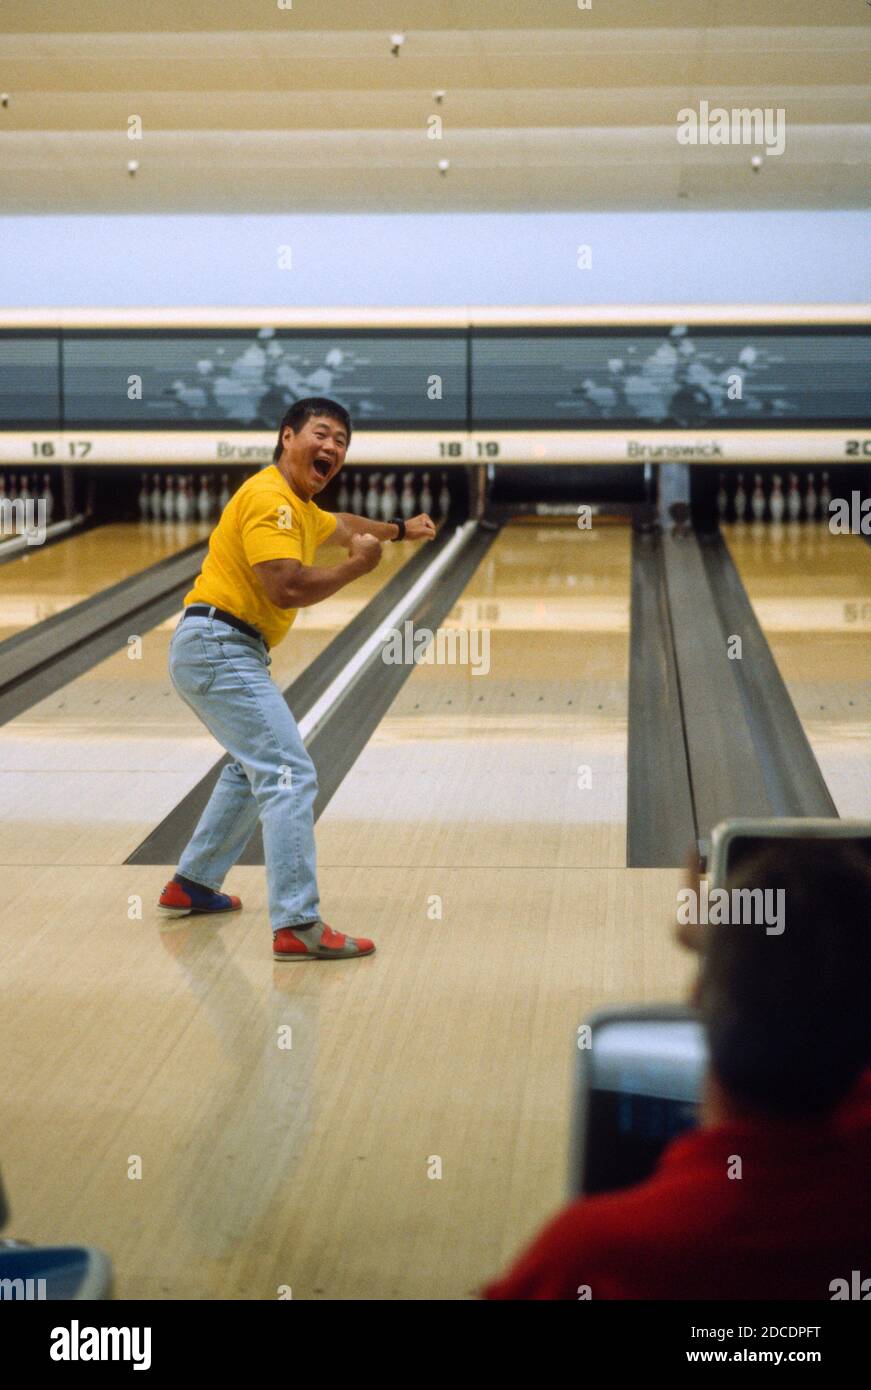 1995, Adult Man throws aStrike while Bowling, USA Stock Photo